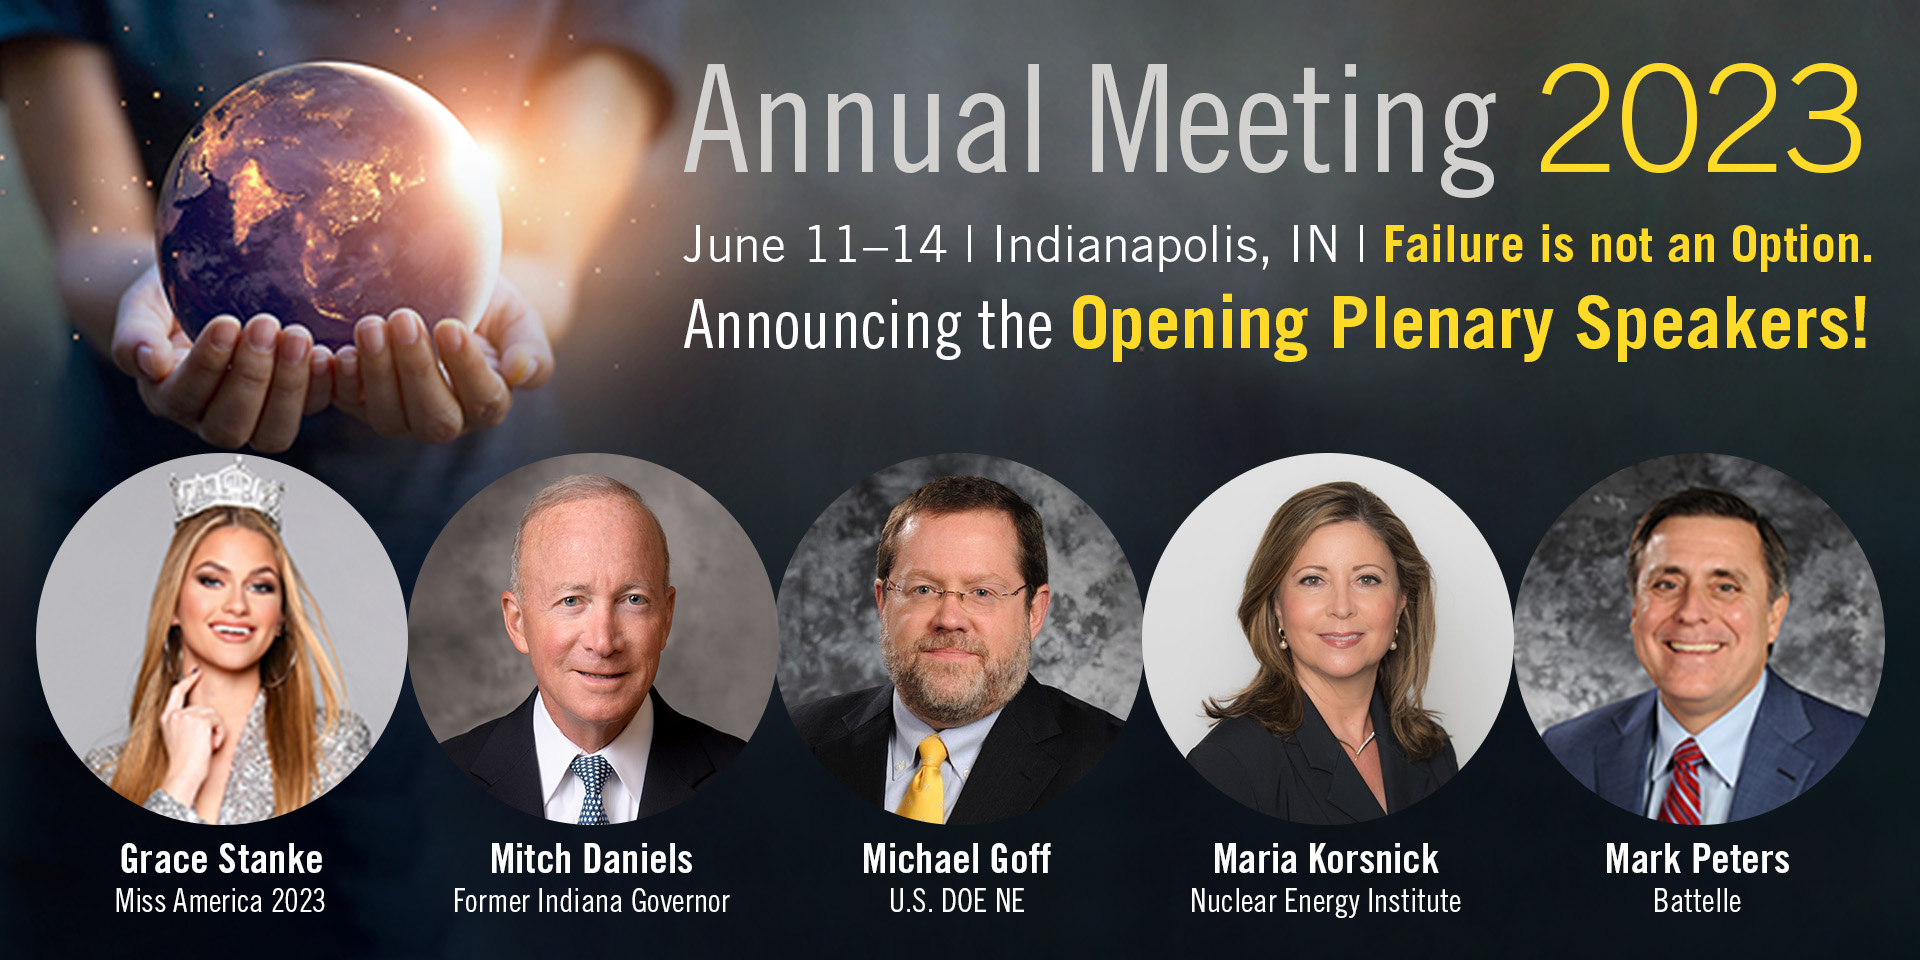 Join us in Indianapolis June 11-14!